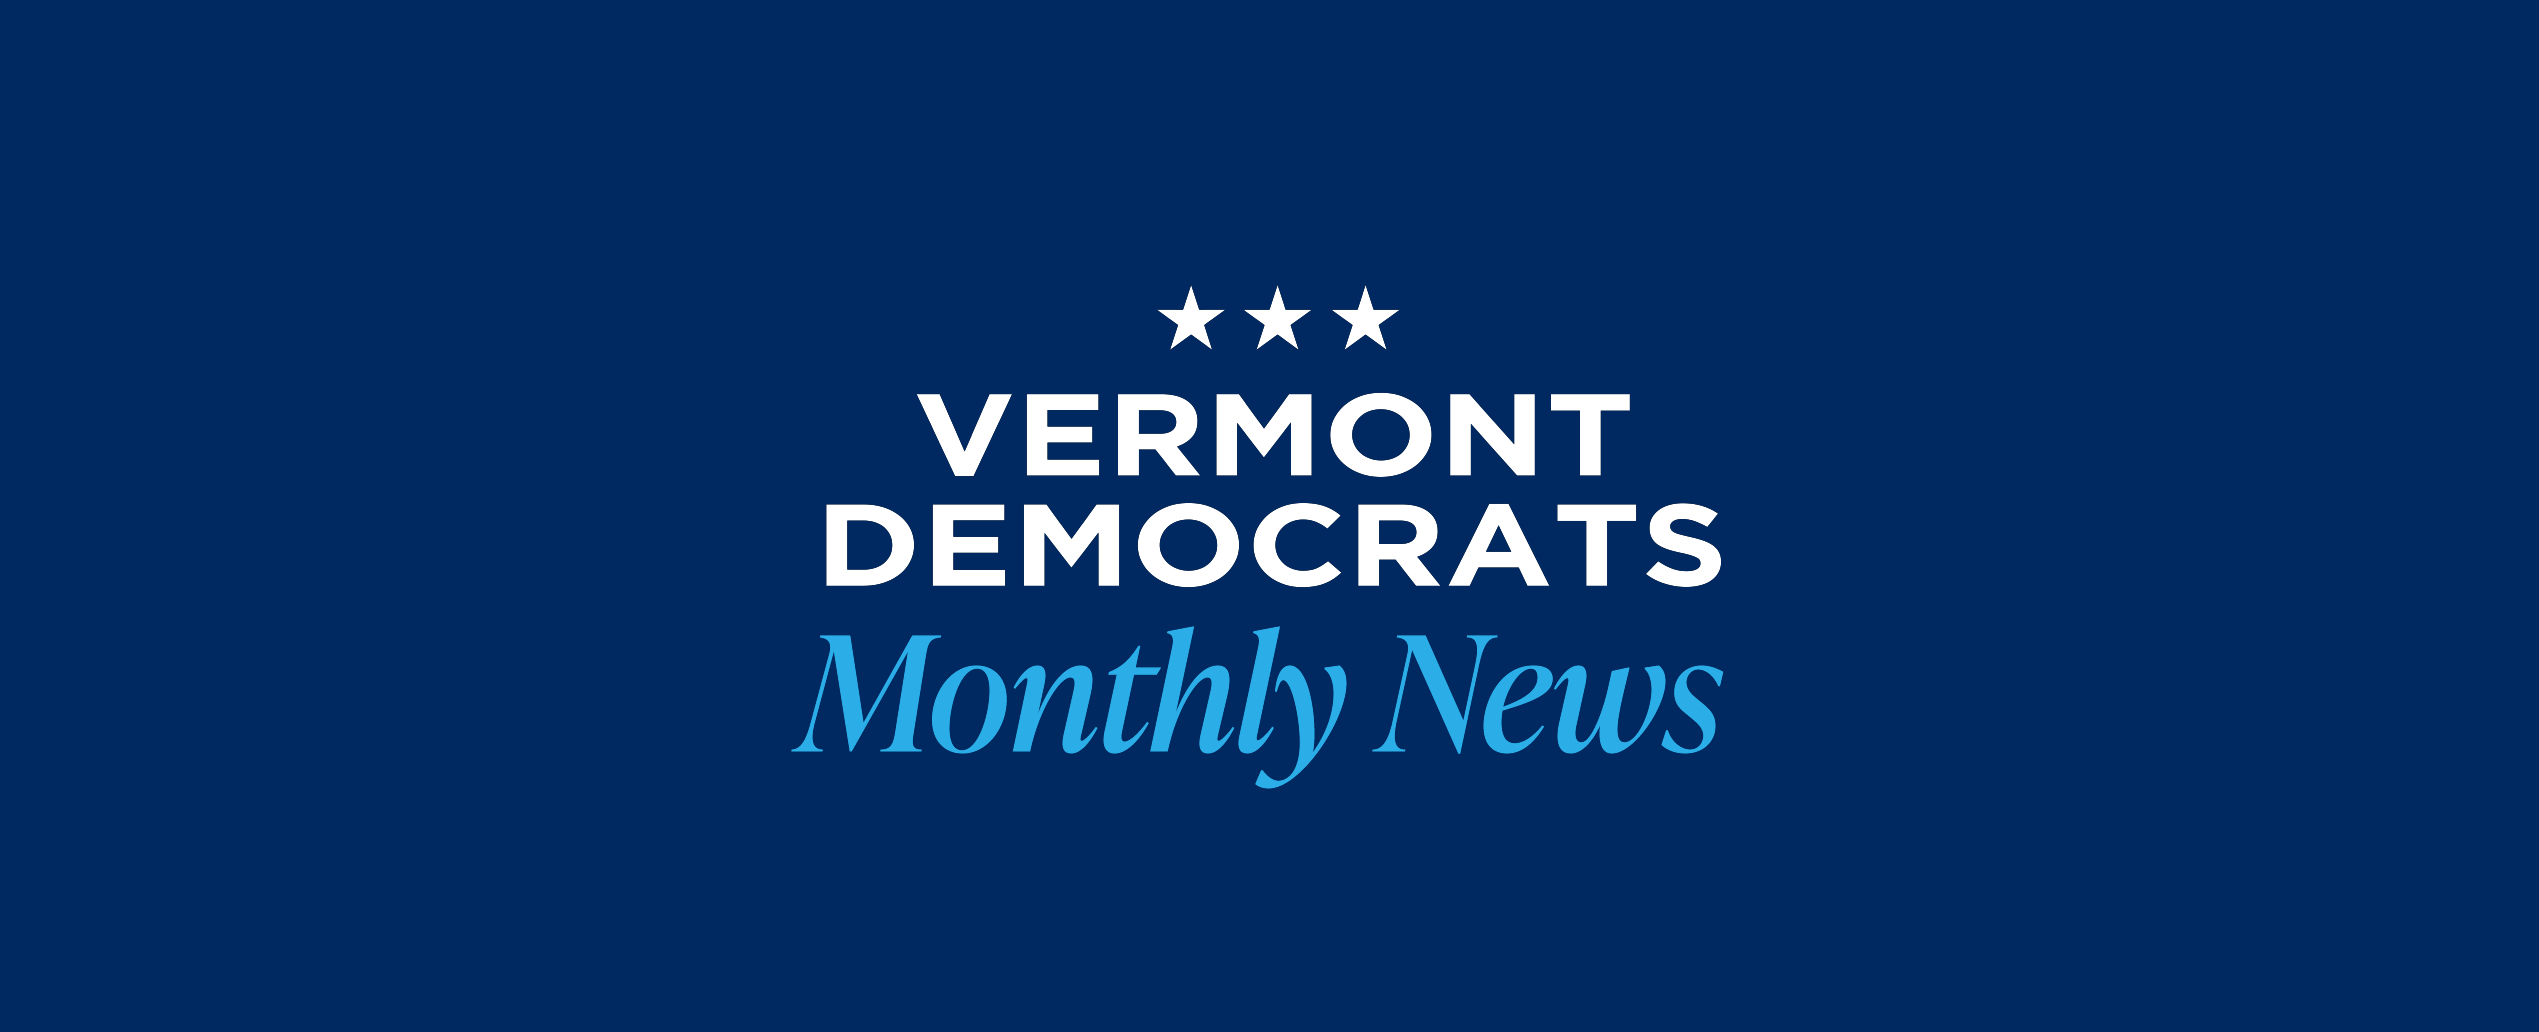 Vdp Monthly News January 31, 2022 - Windham County